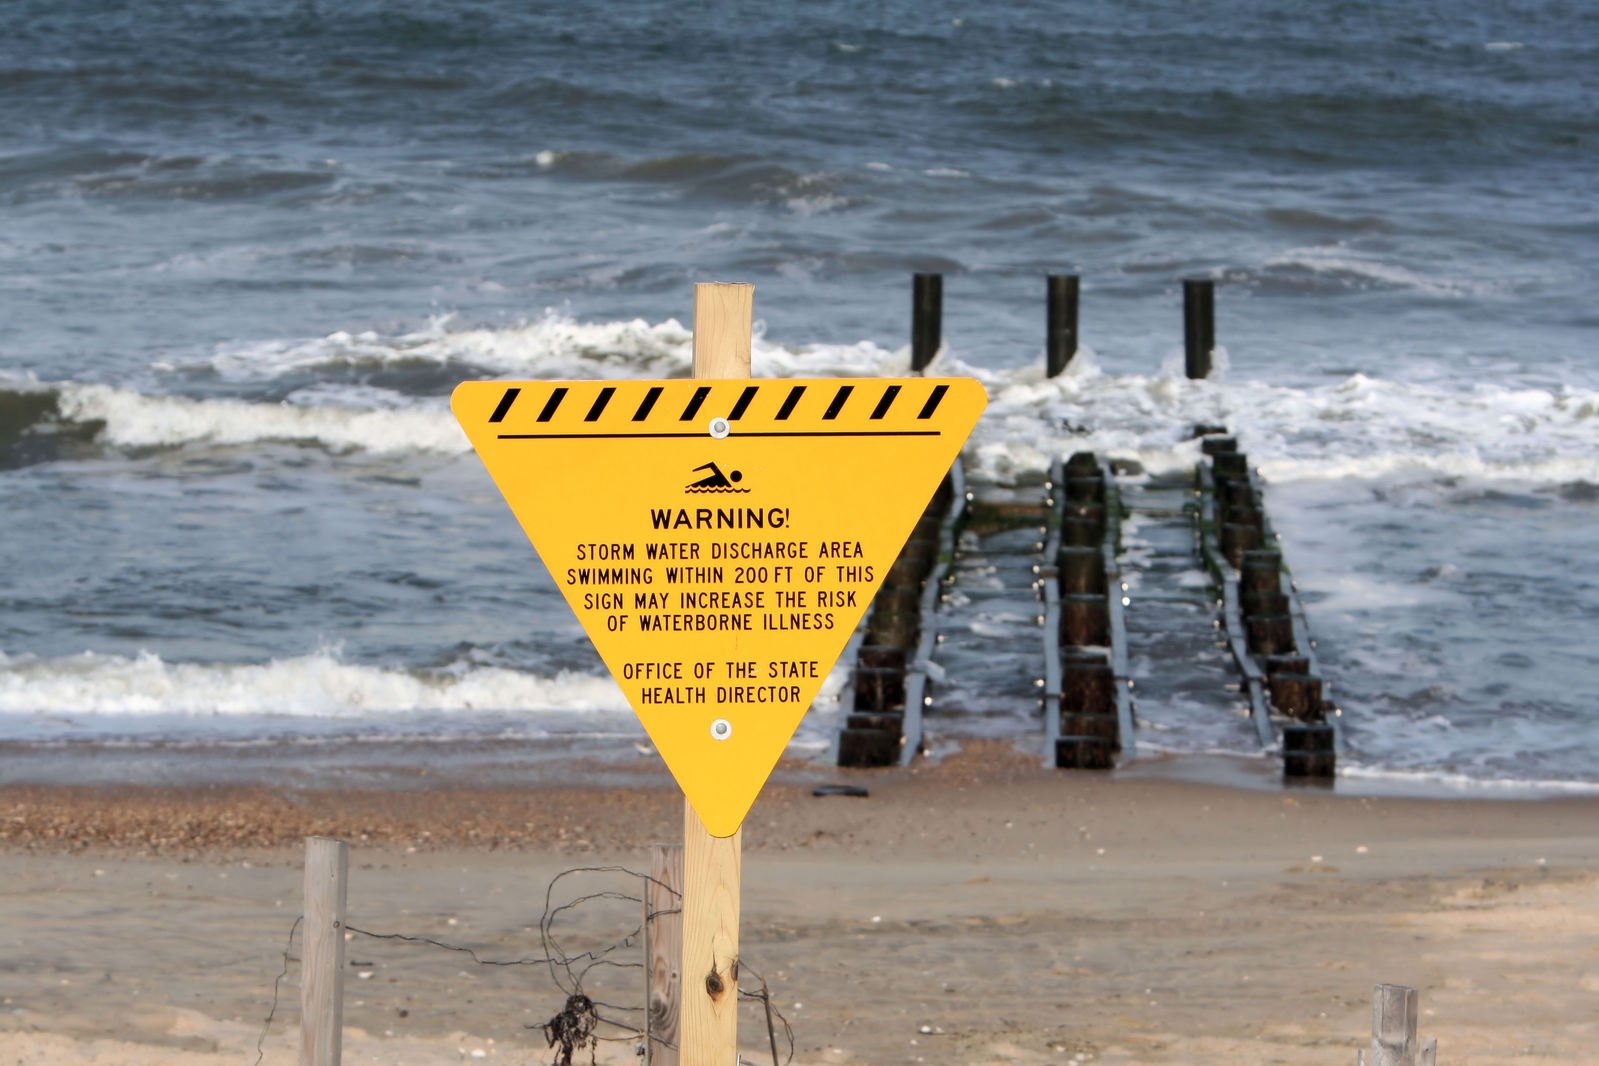 a yellow and black warning sign on a beach